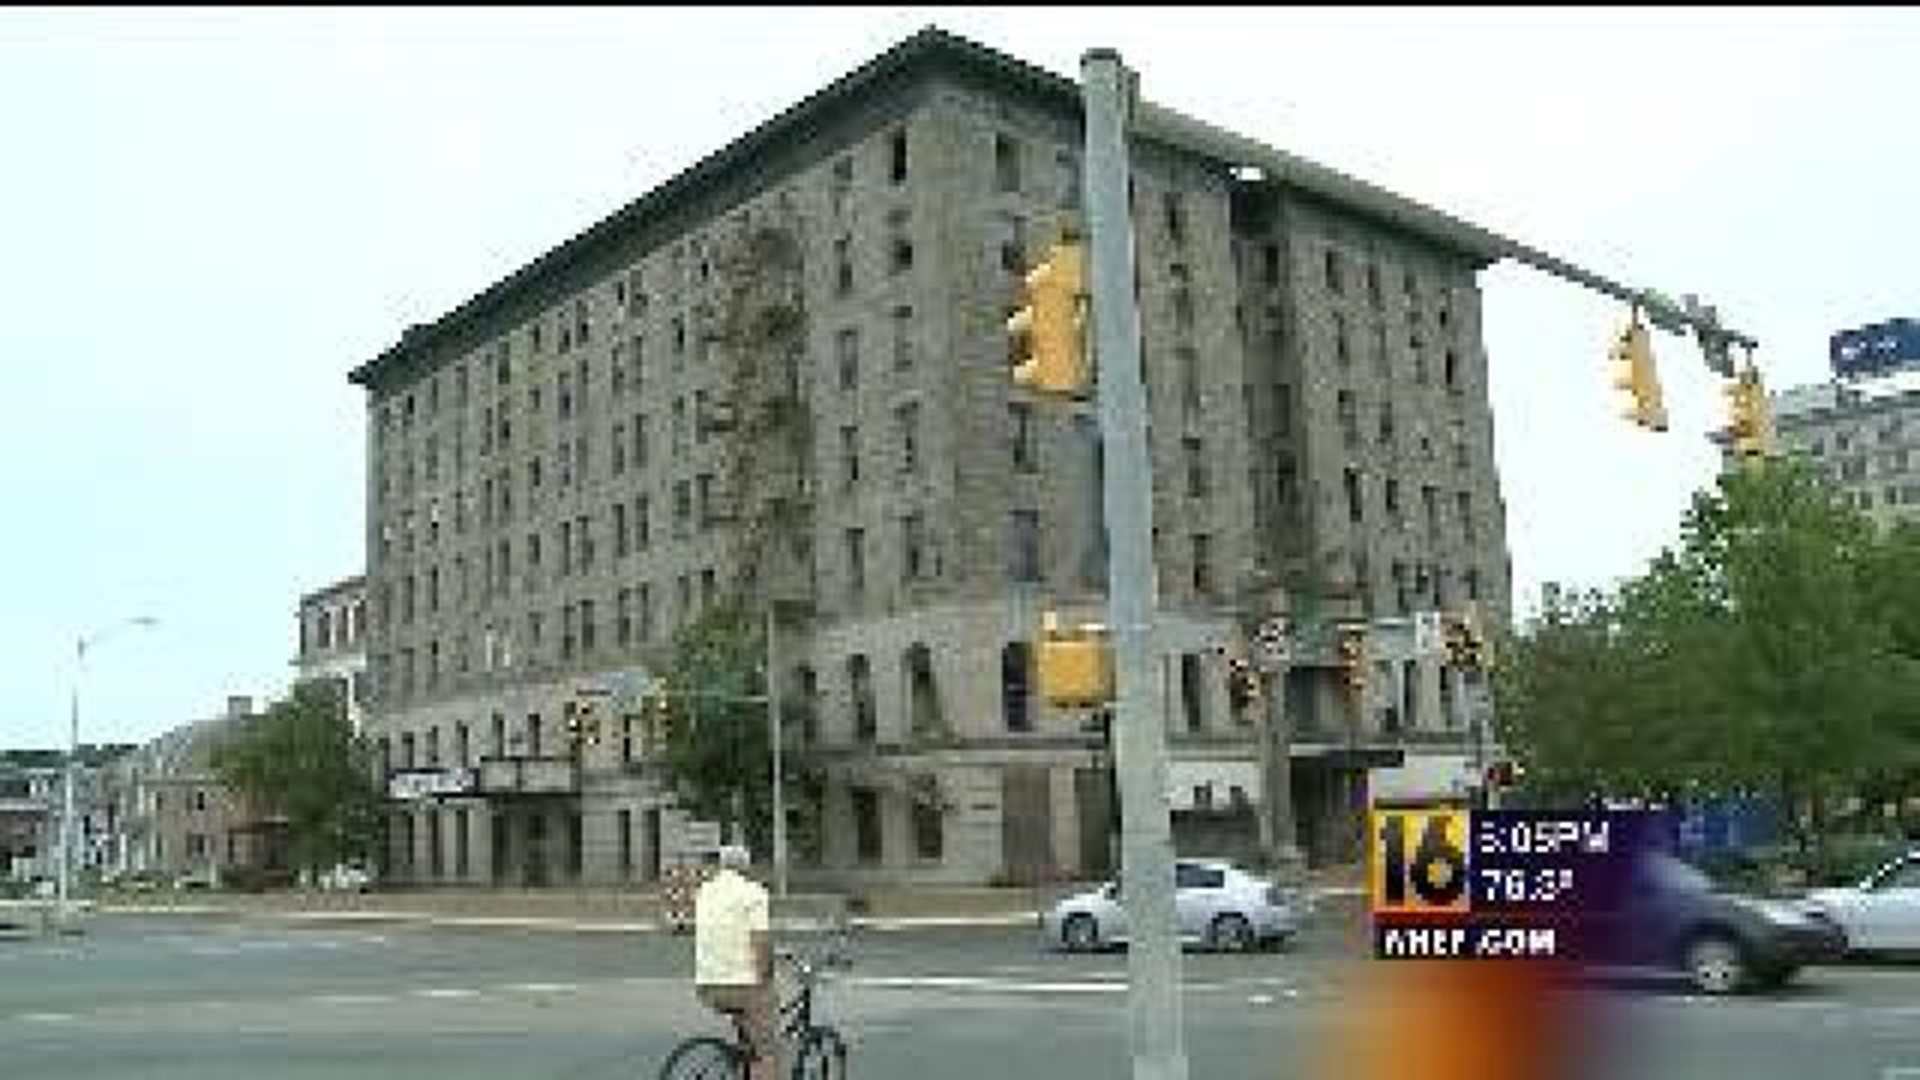 Bids Announced For Hotel Sterling Demolition